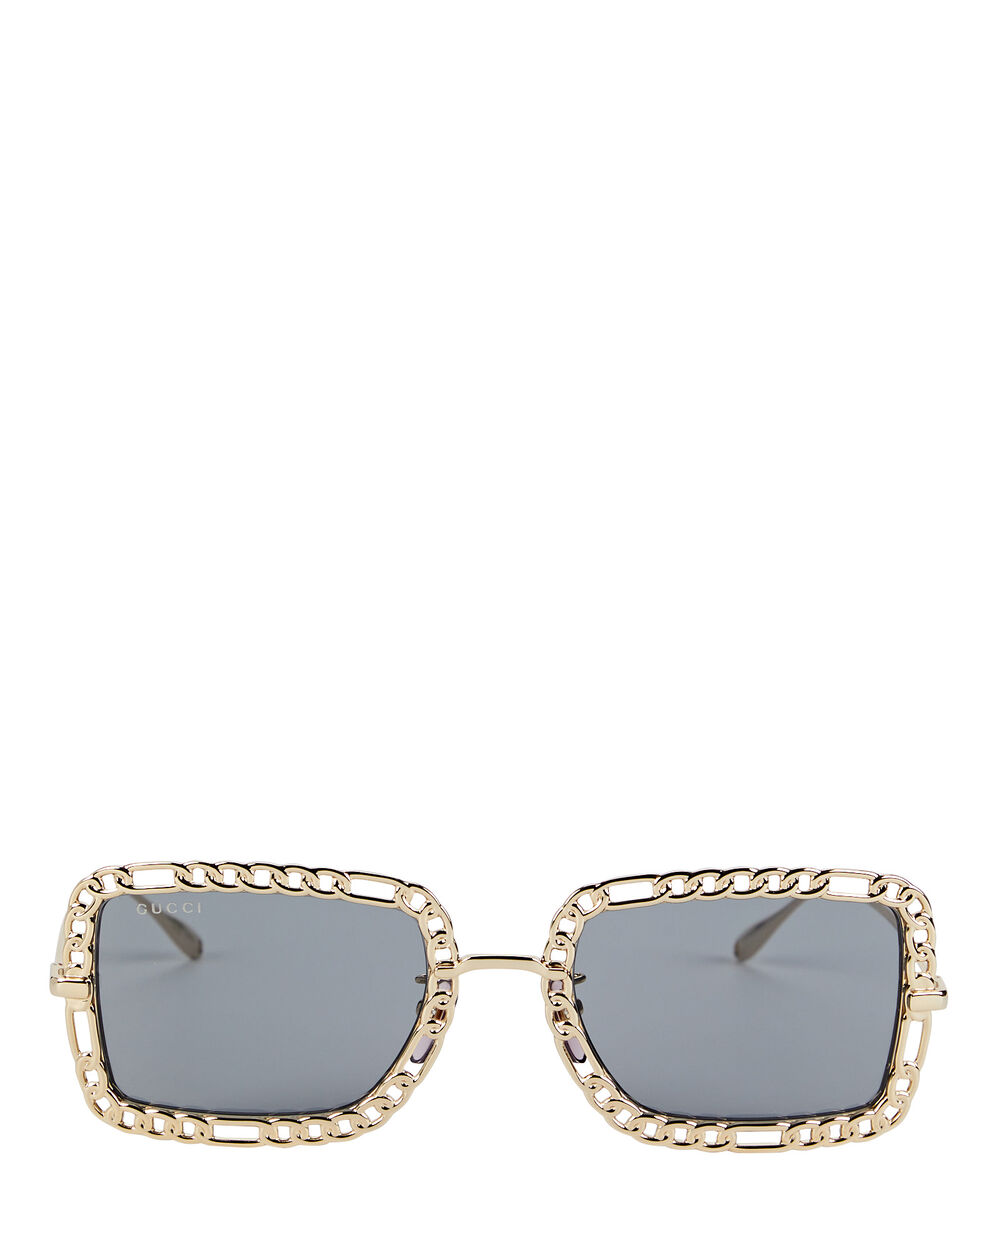 Gucci Rectangle Chain-Embellished Sunglasses